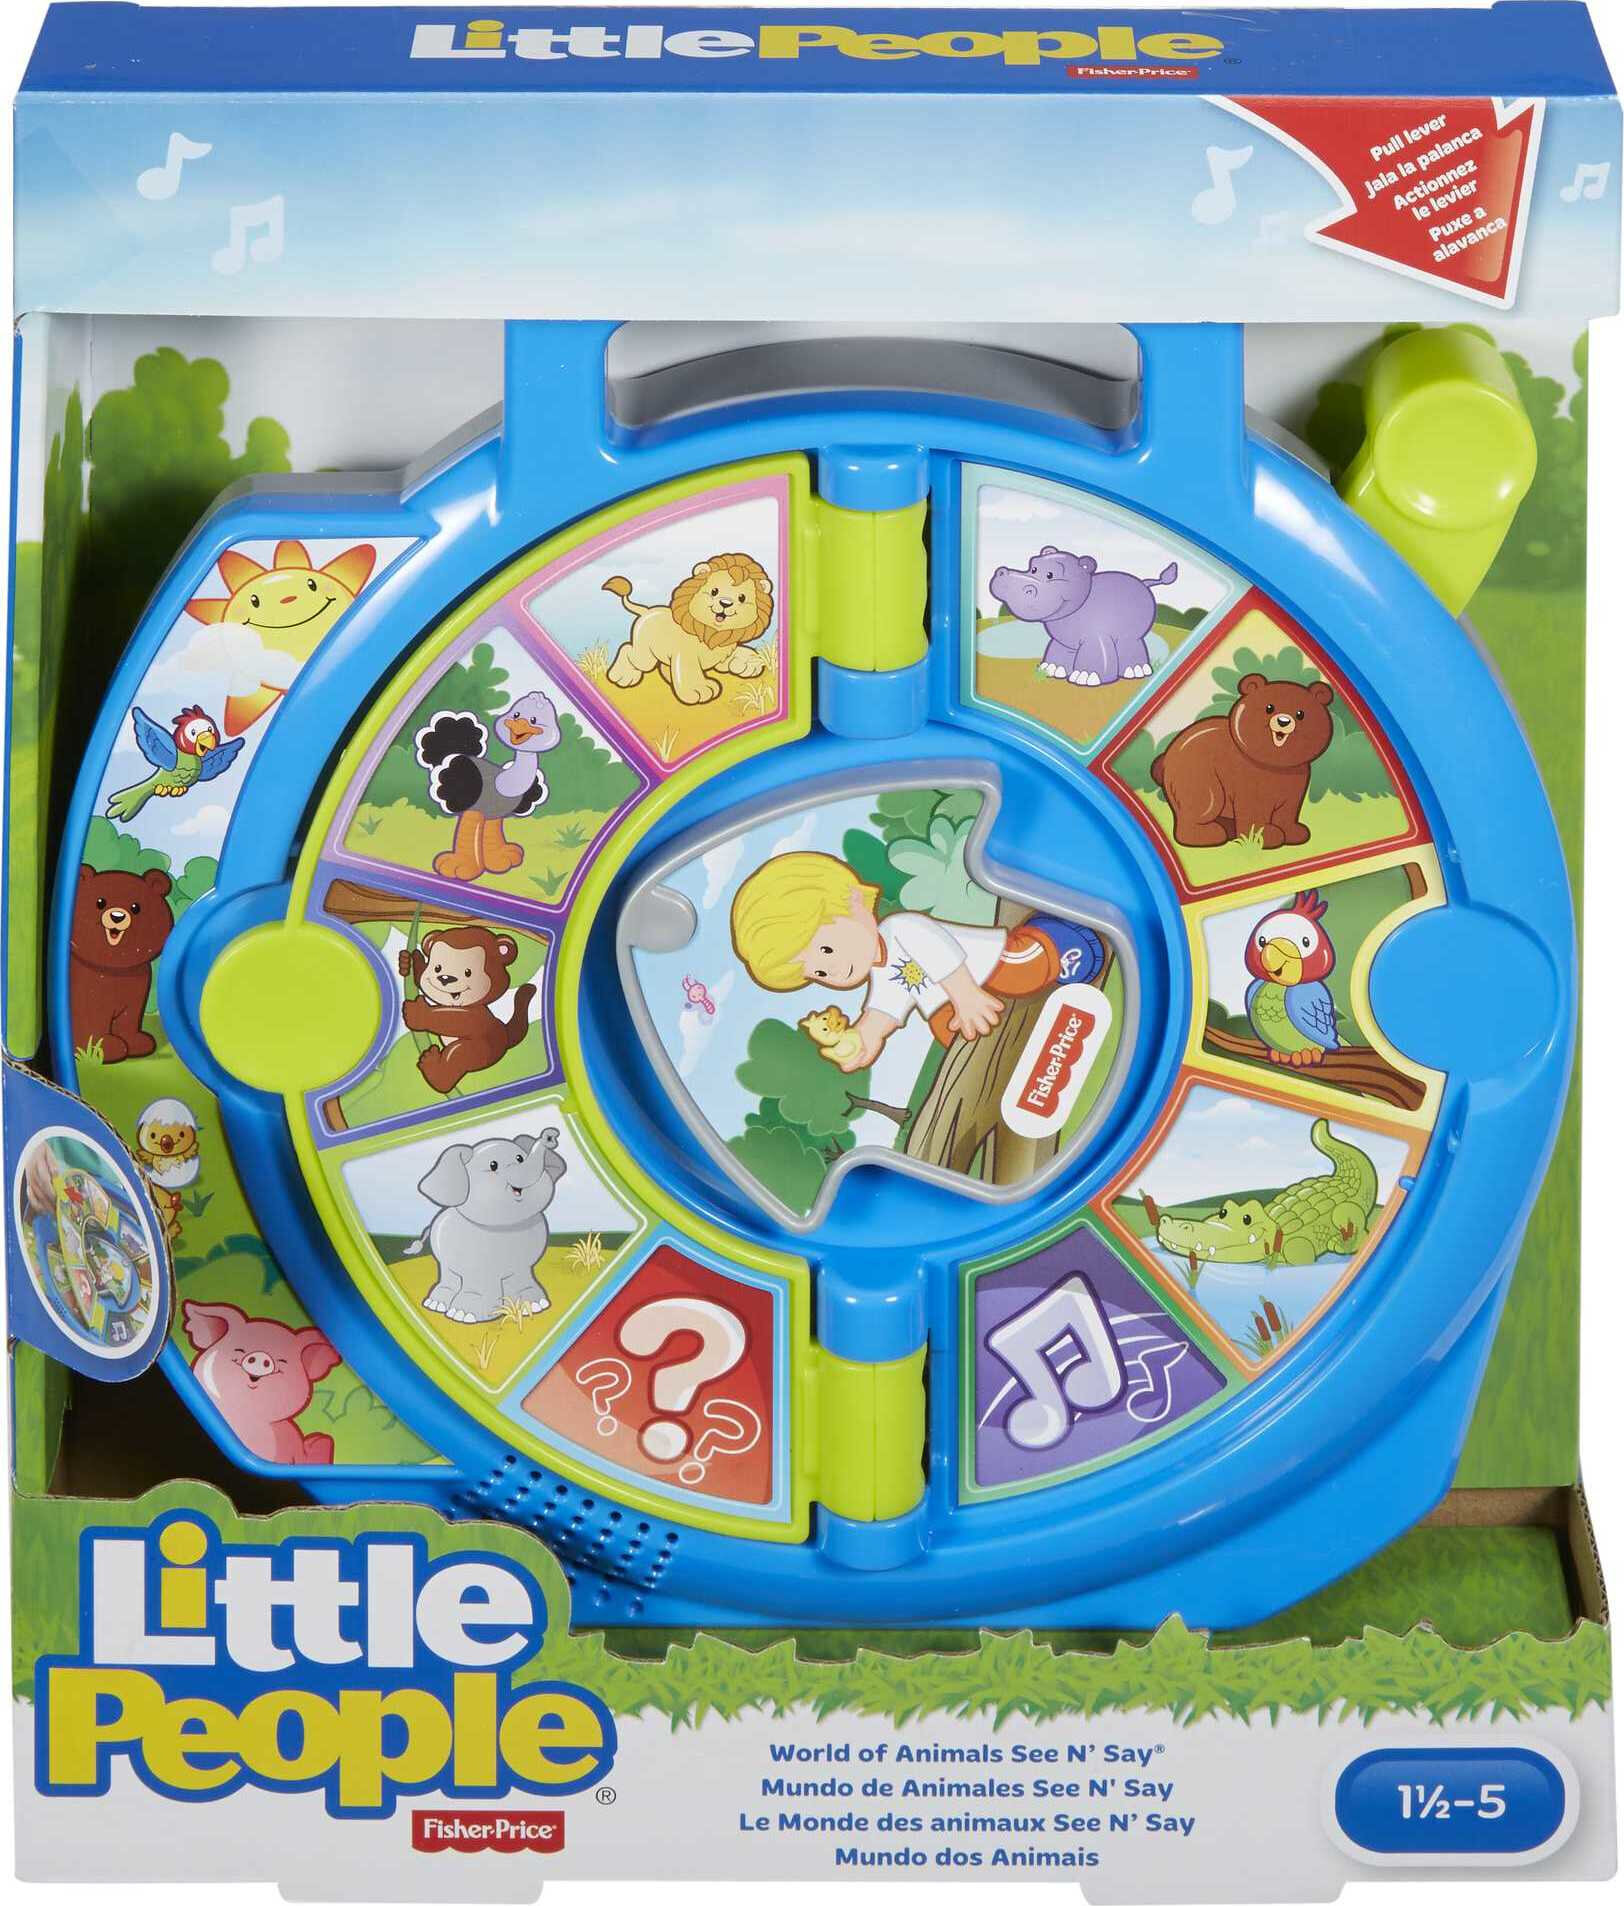 Fisher-Price Little People World of Animals See ‘n Say Toddler Musical Learning Toy - image 5 of 6